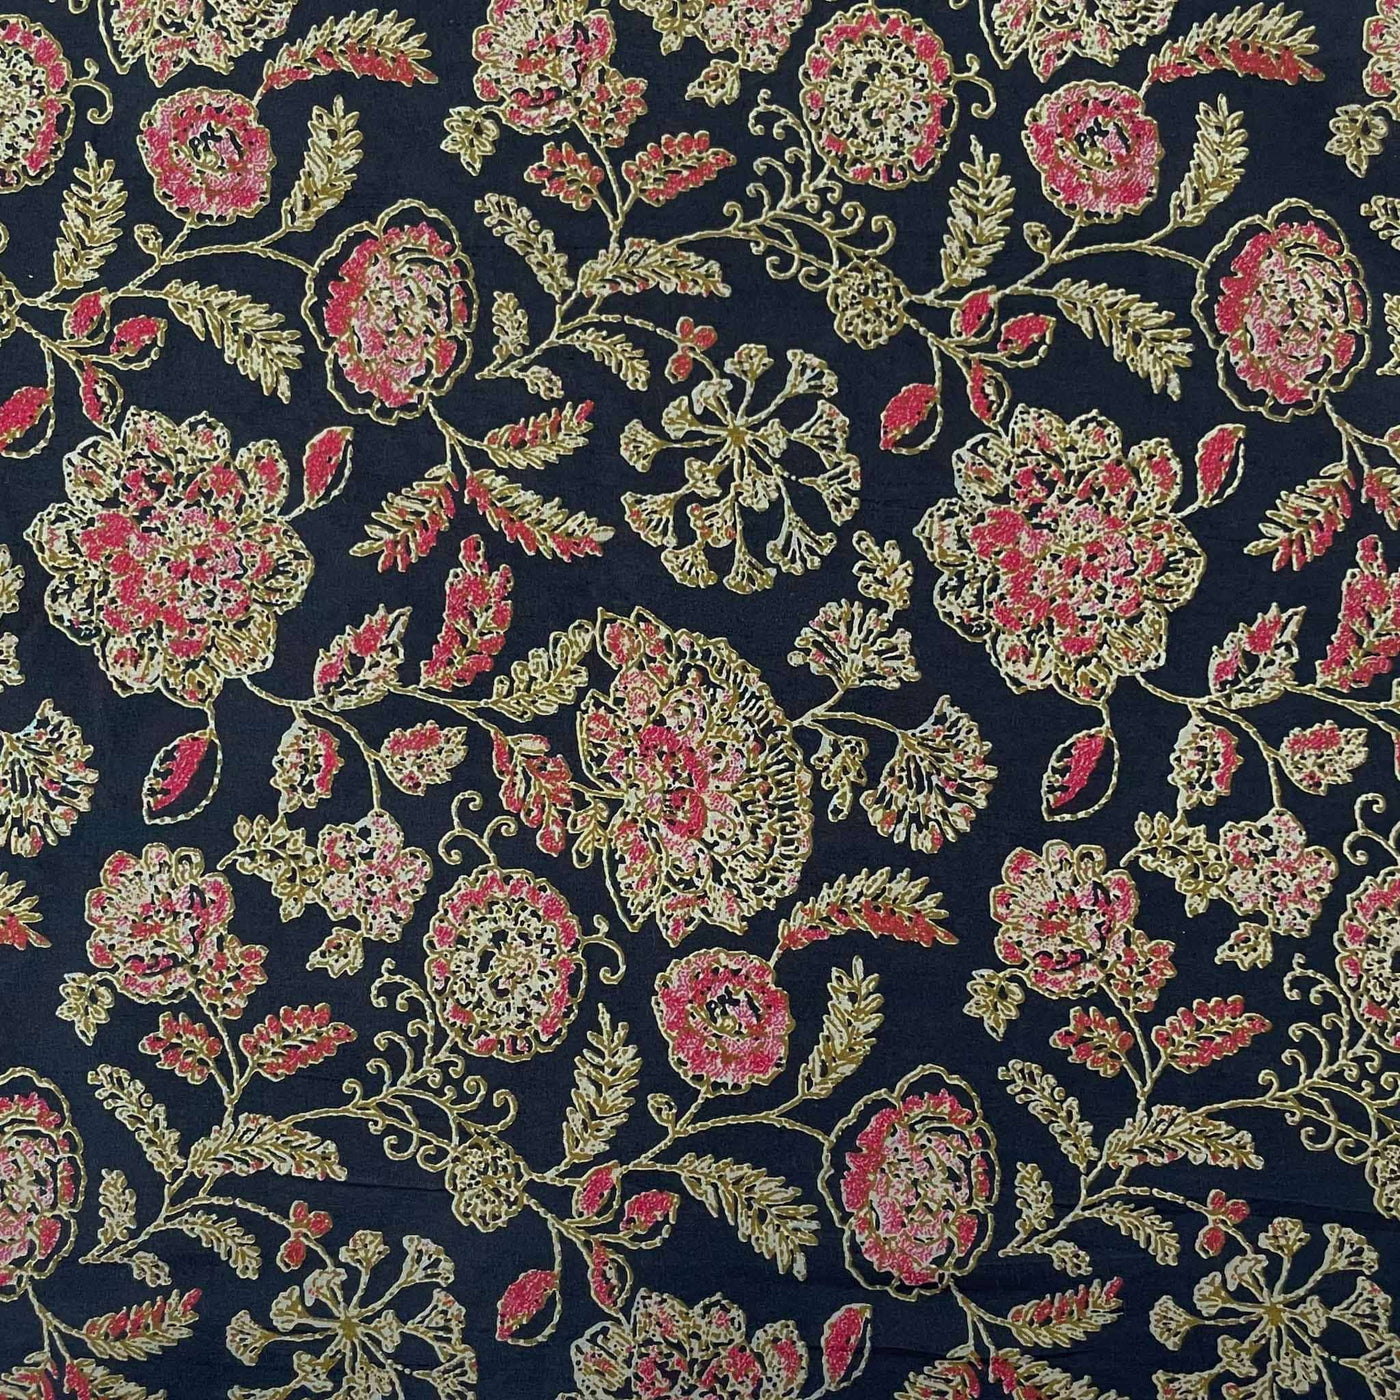 Fabric Pandit Cut Piece (CUT PIECE) Black and Red Wild Flowers Hand Block Printed Pure Cotton Fabric Width (43 inches)